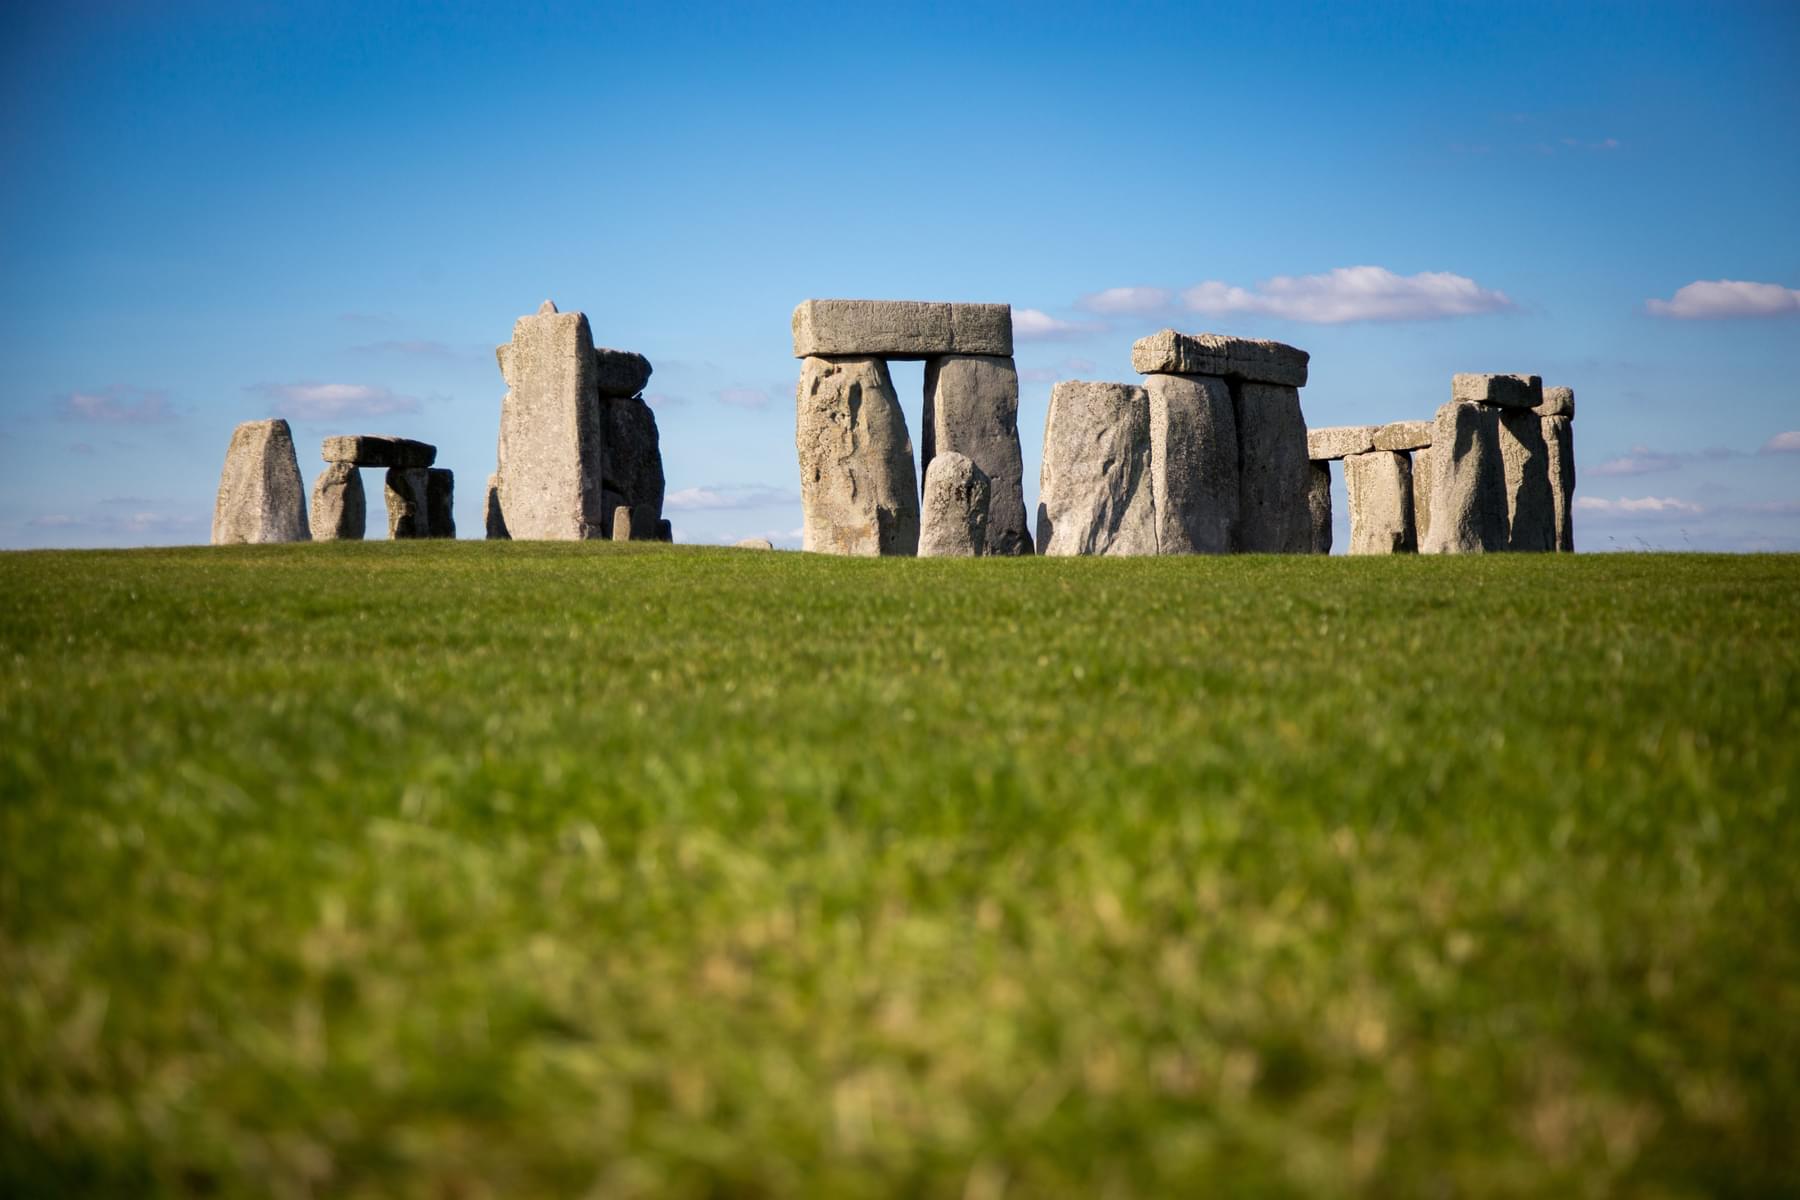 Why Experience Stonehenge Solstice?